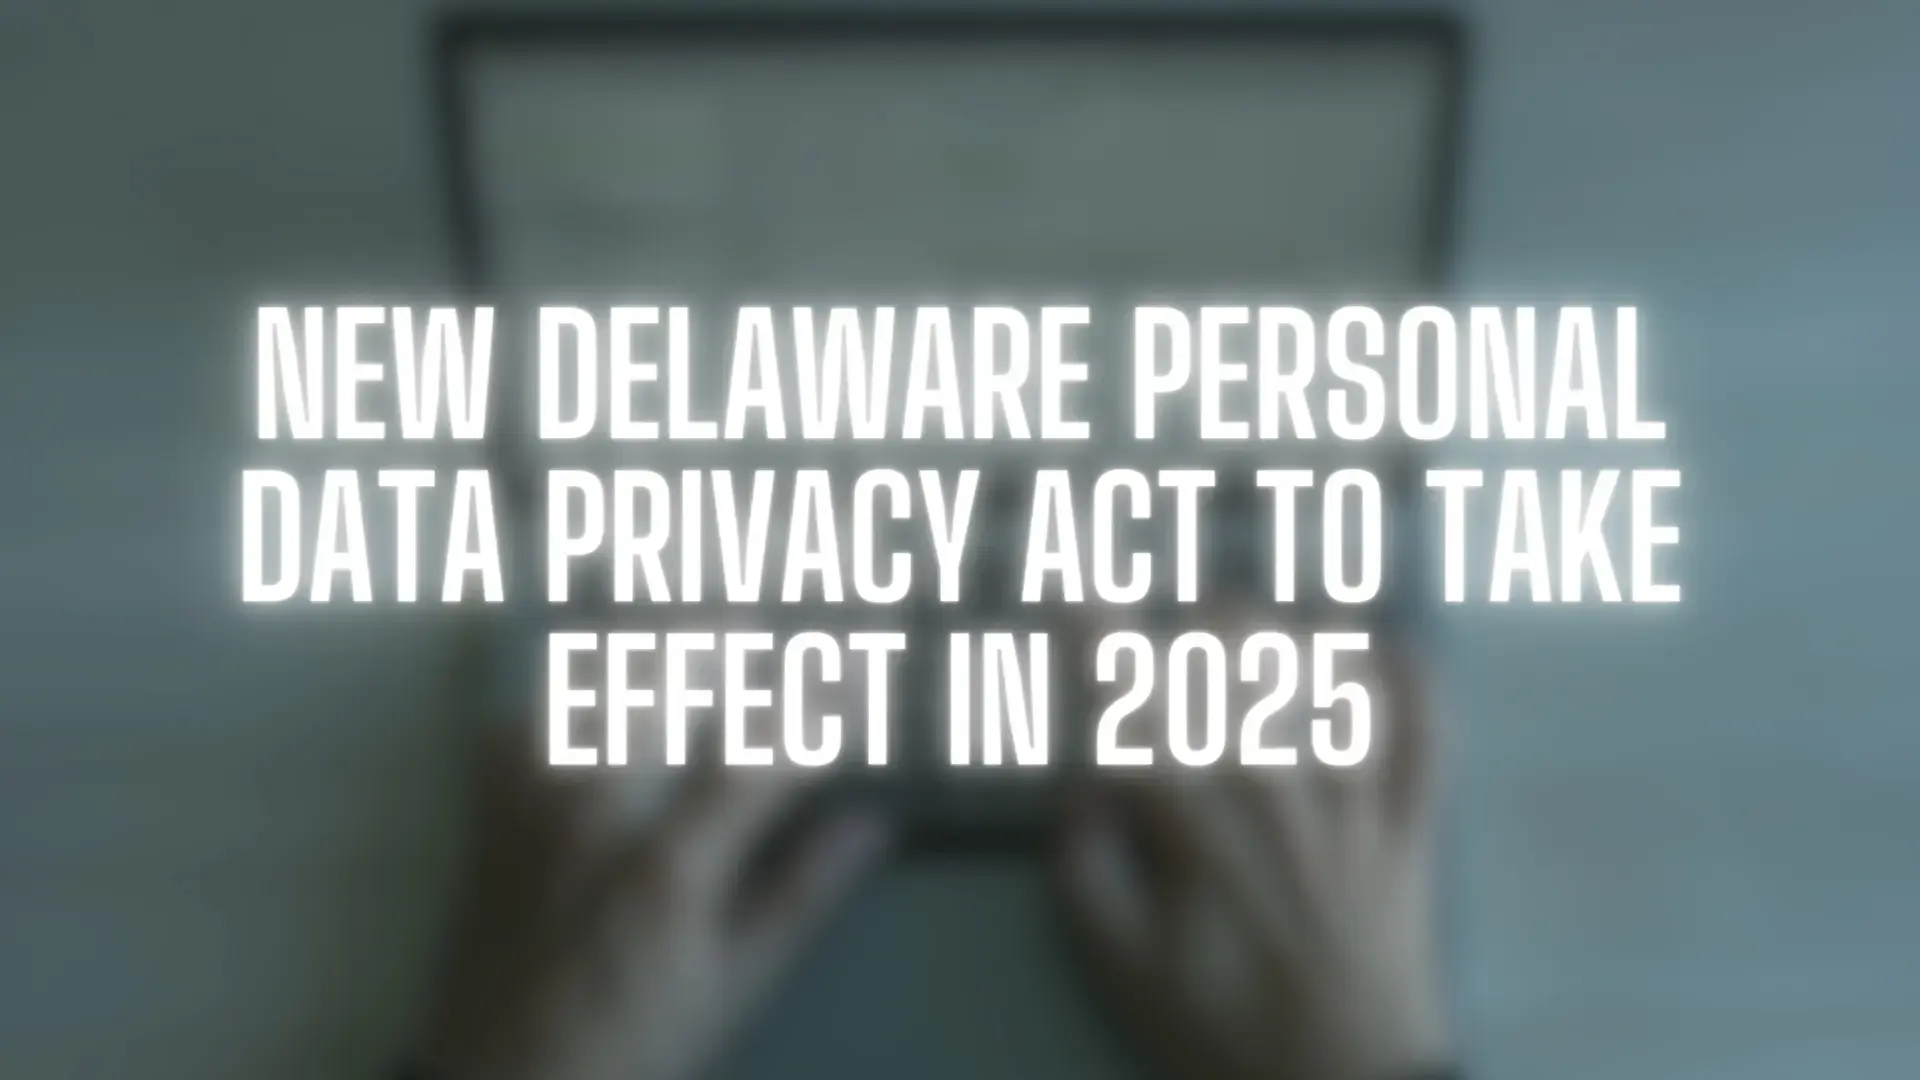 New Delaware Personal Data Privacy Act to Take Effect in 2025